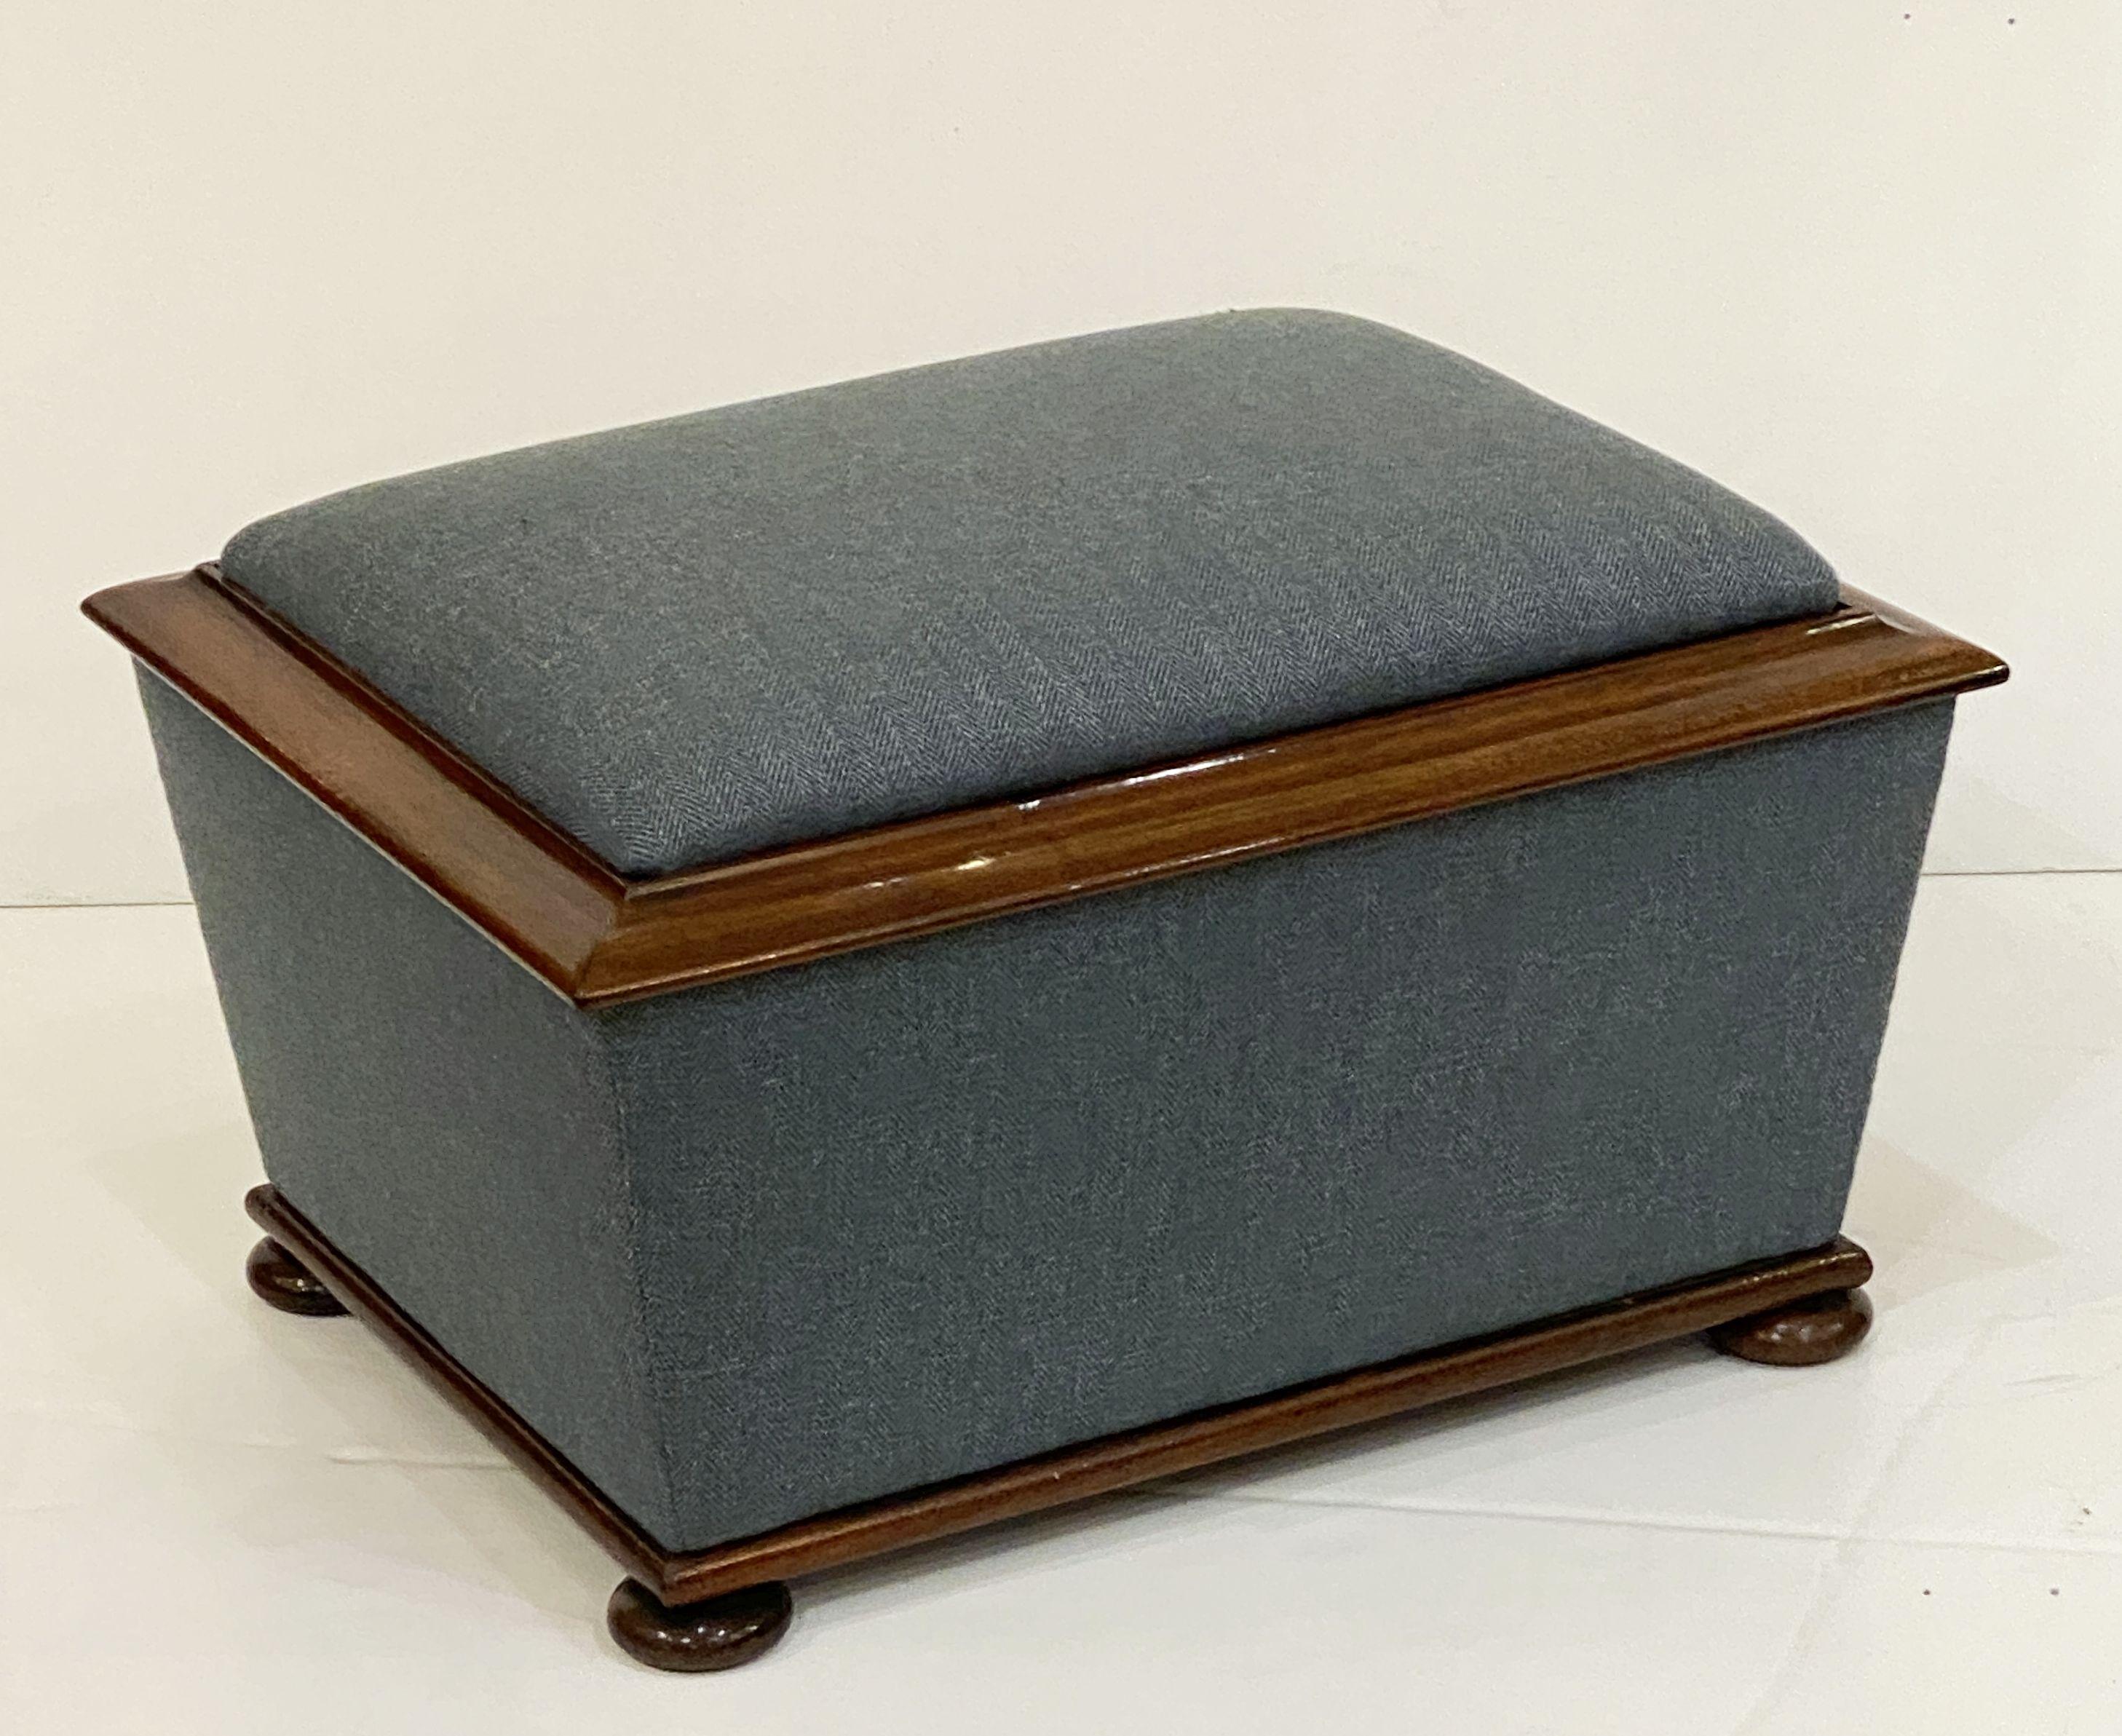 A handsome, comfortable English rectangular upholstered trunk or frame ottoman (pouffe), featuring an upholstered seat with hinged, tufted lid that lifts for storage, framed with accents of mahogany around the top and base, and resting on bun feet.